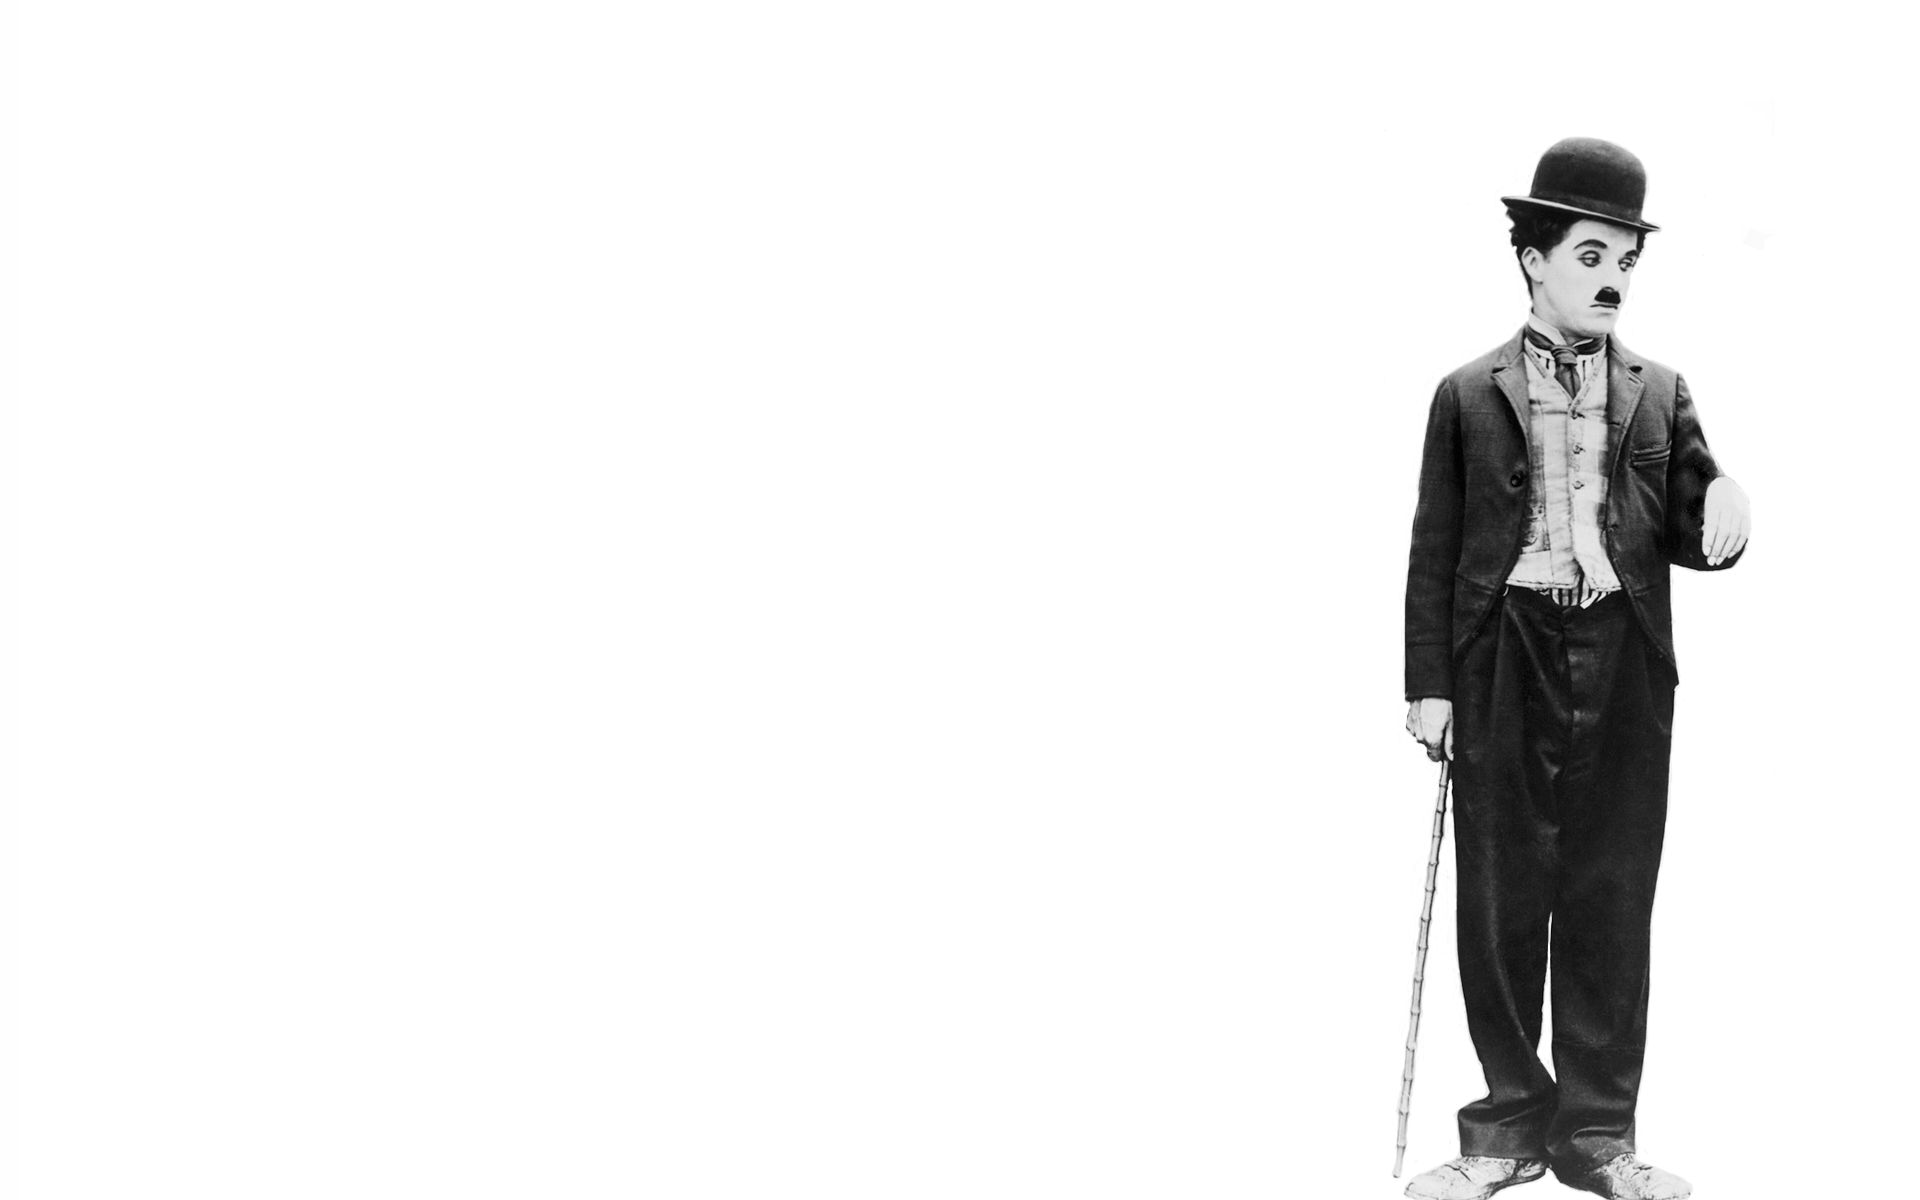 General 1920x1200 Charlie Chaplin The Tramp movies men celebrity simple background